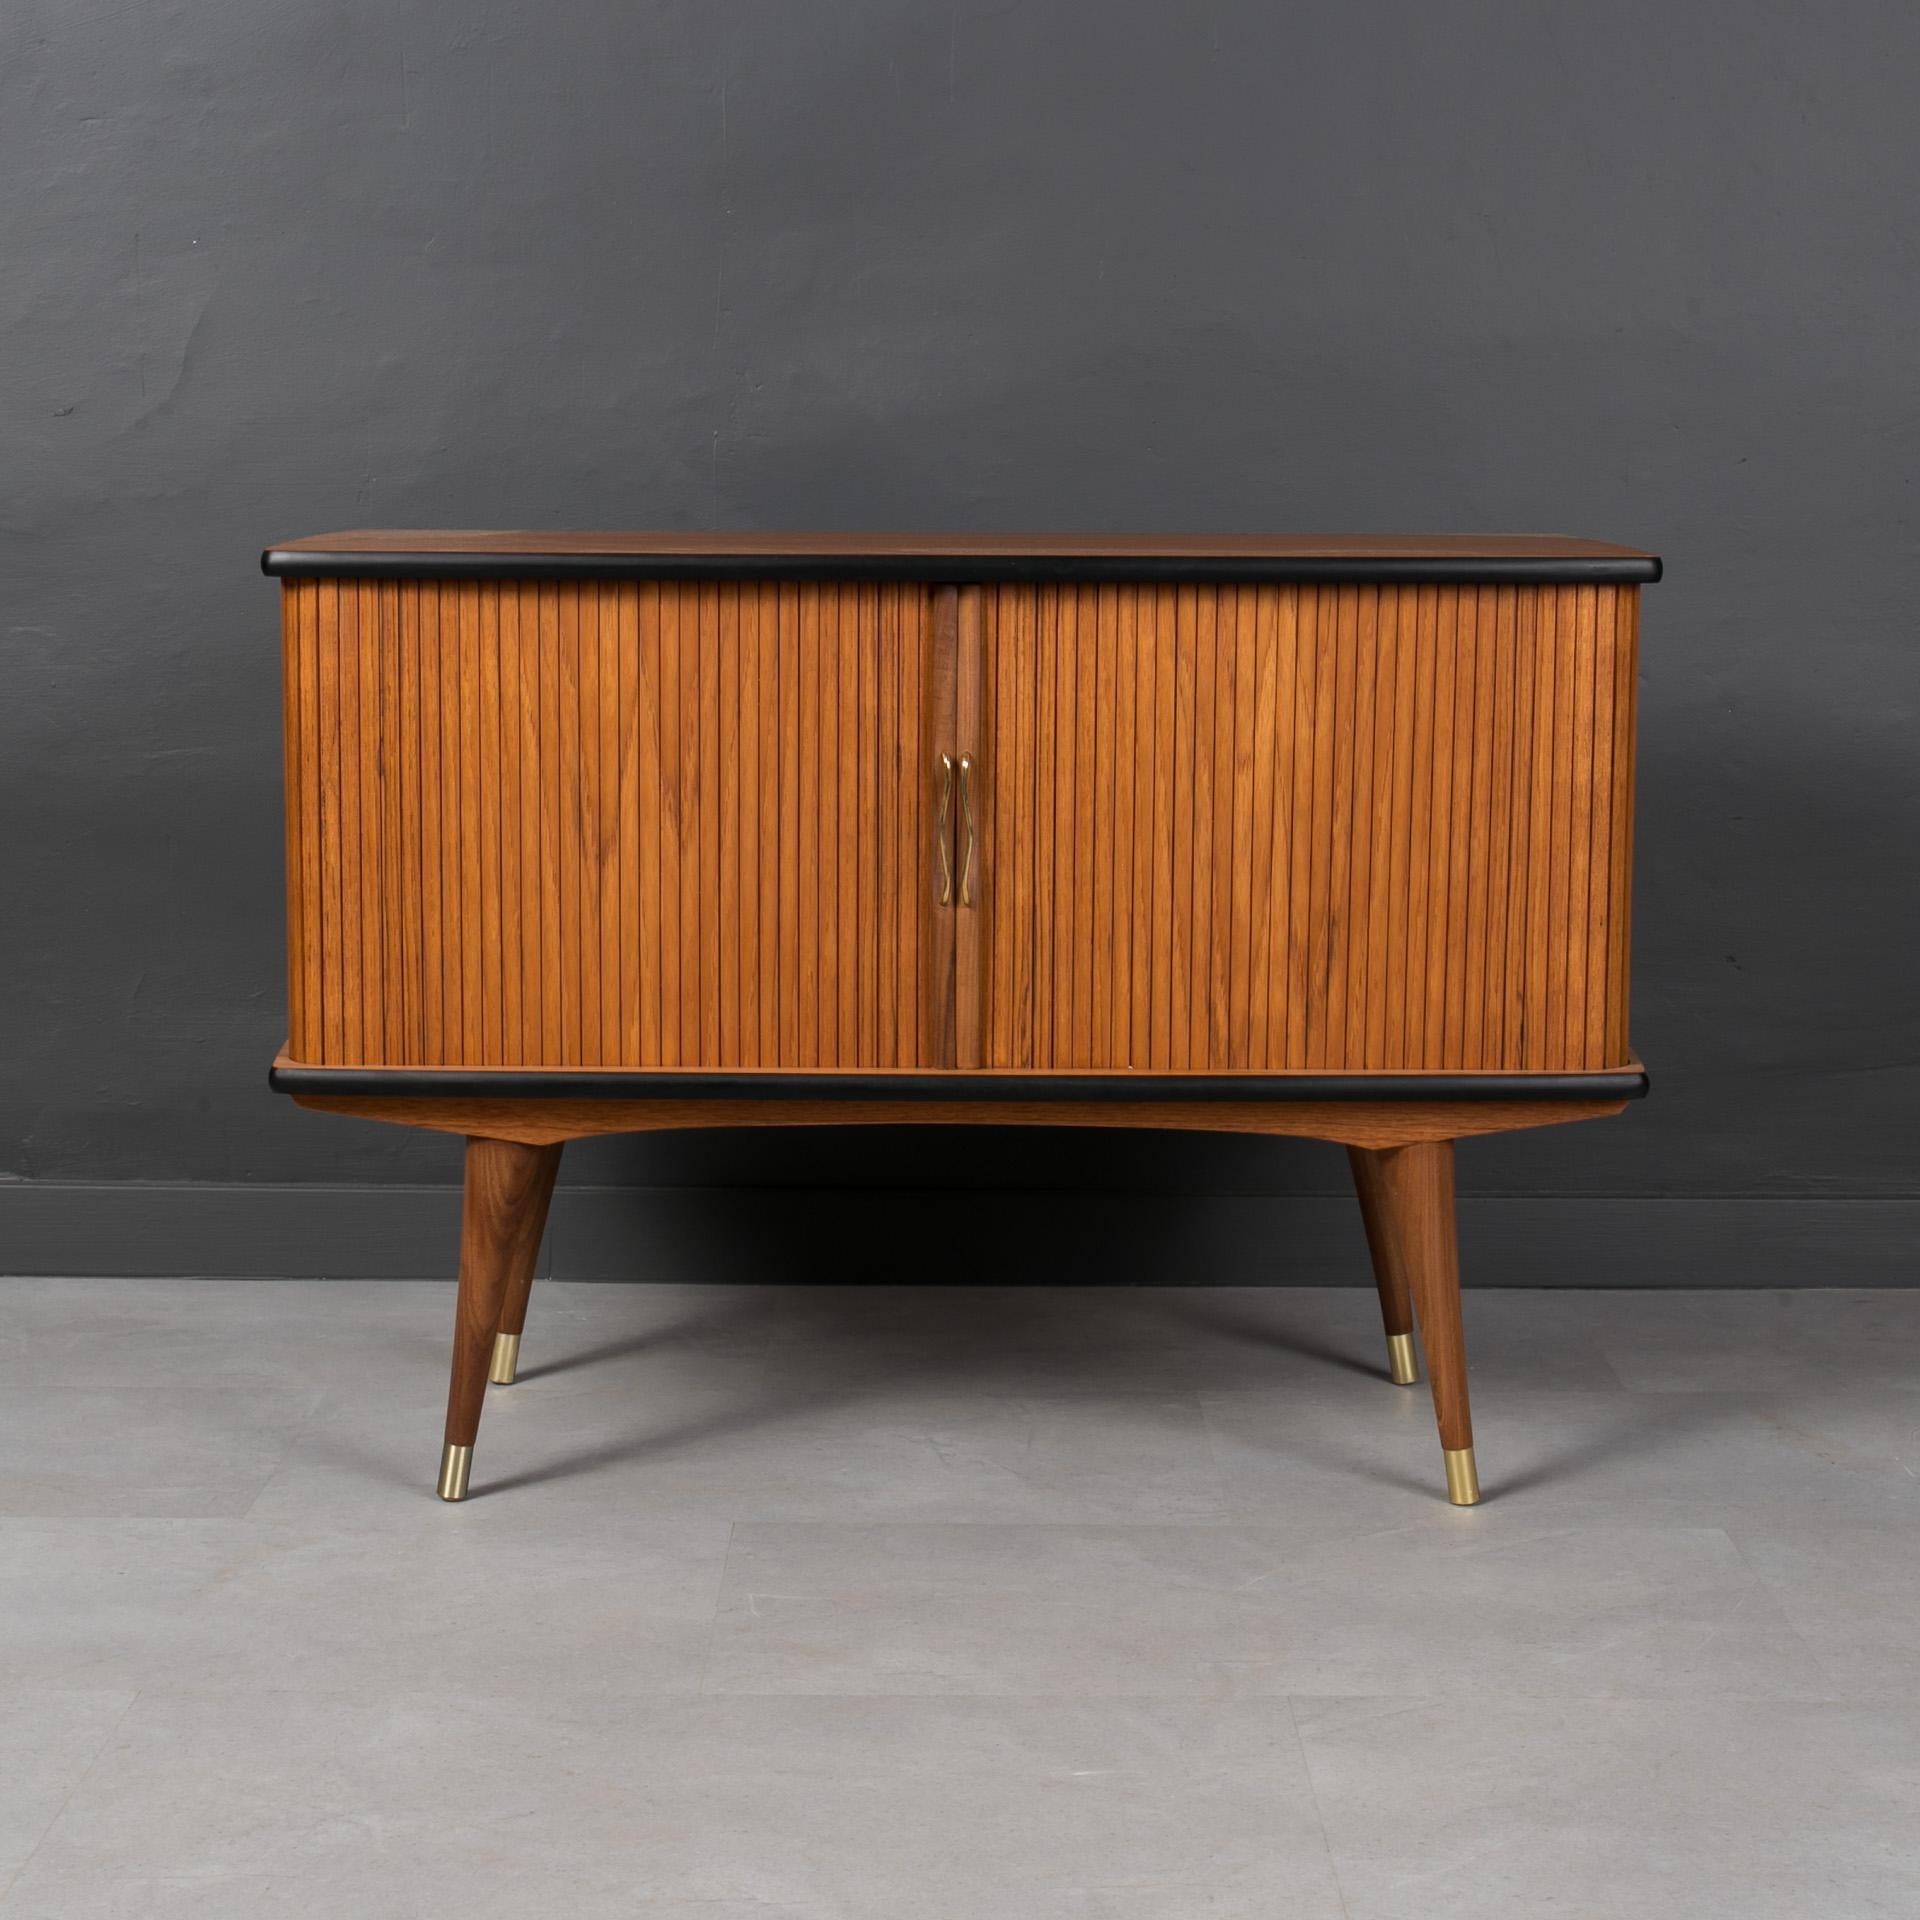 This teak sideboard comes from Norway and was made around 1960s. It features very smart solution of tambour doors that reveal the main storage section. Tambour doors work easily. The chest is set on a solid teak frame, all four legs are finished